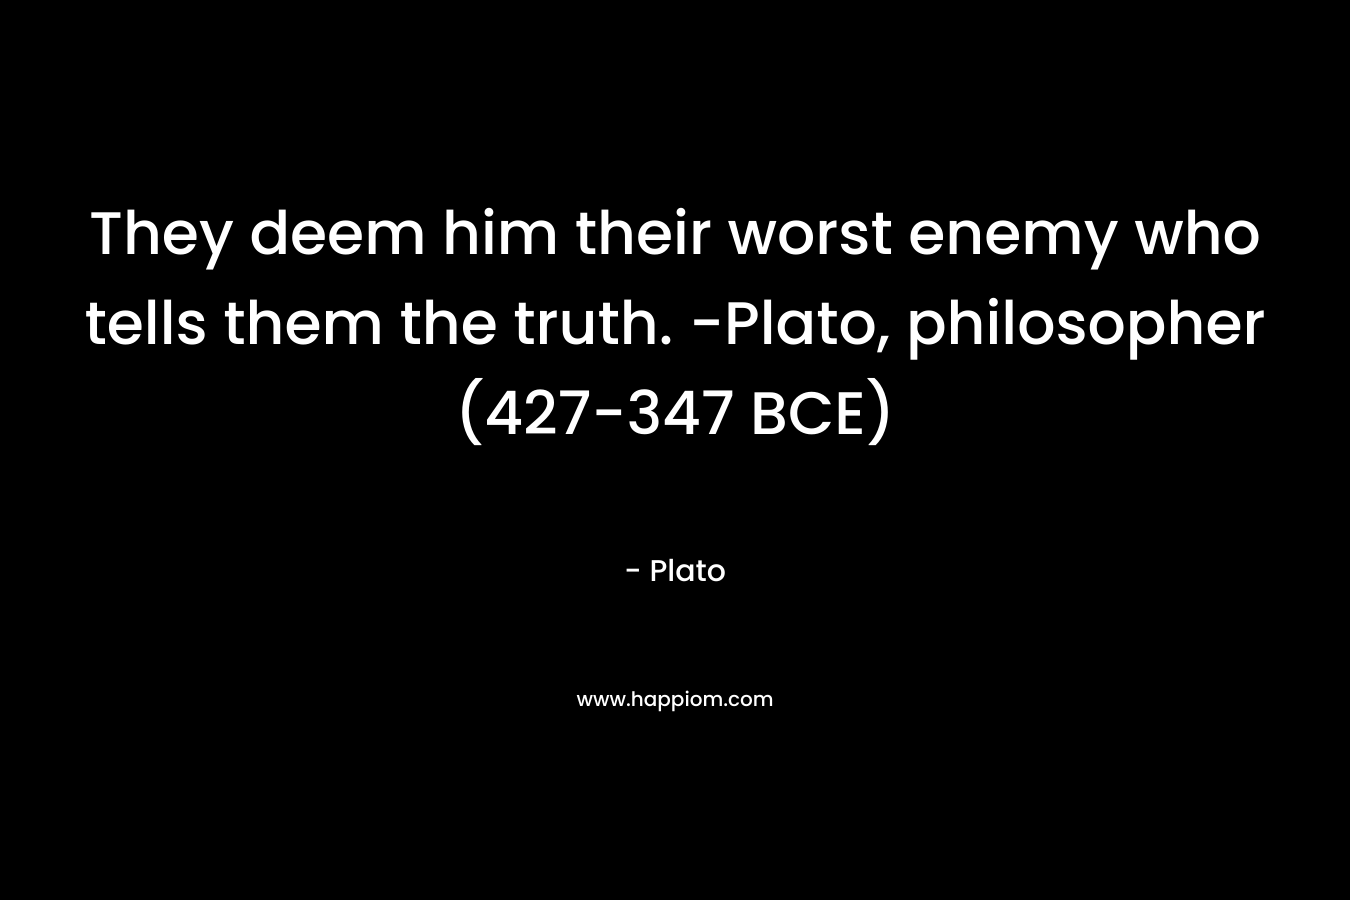 They deem him their worst enemy who tells them the truth. -Plato, philosopher (427-347 BCE) – Plato